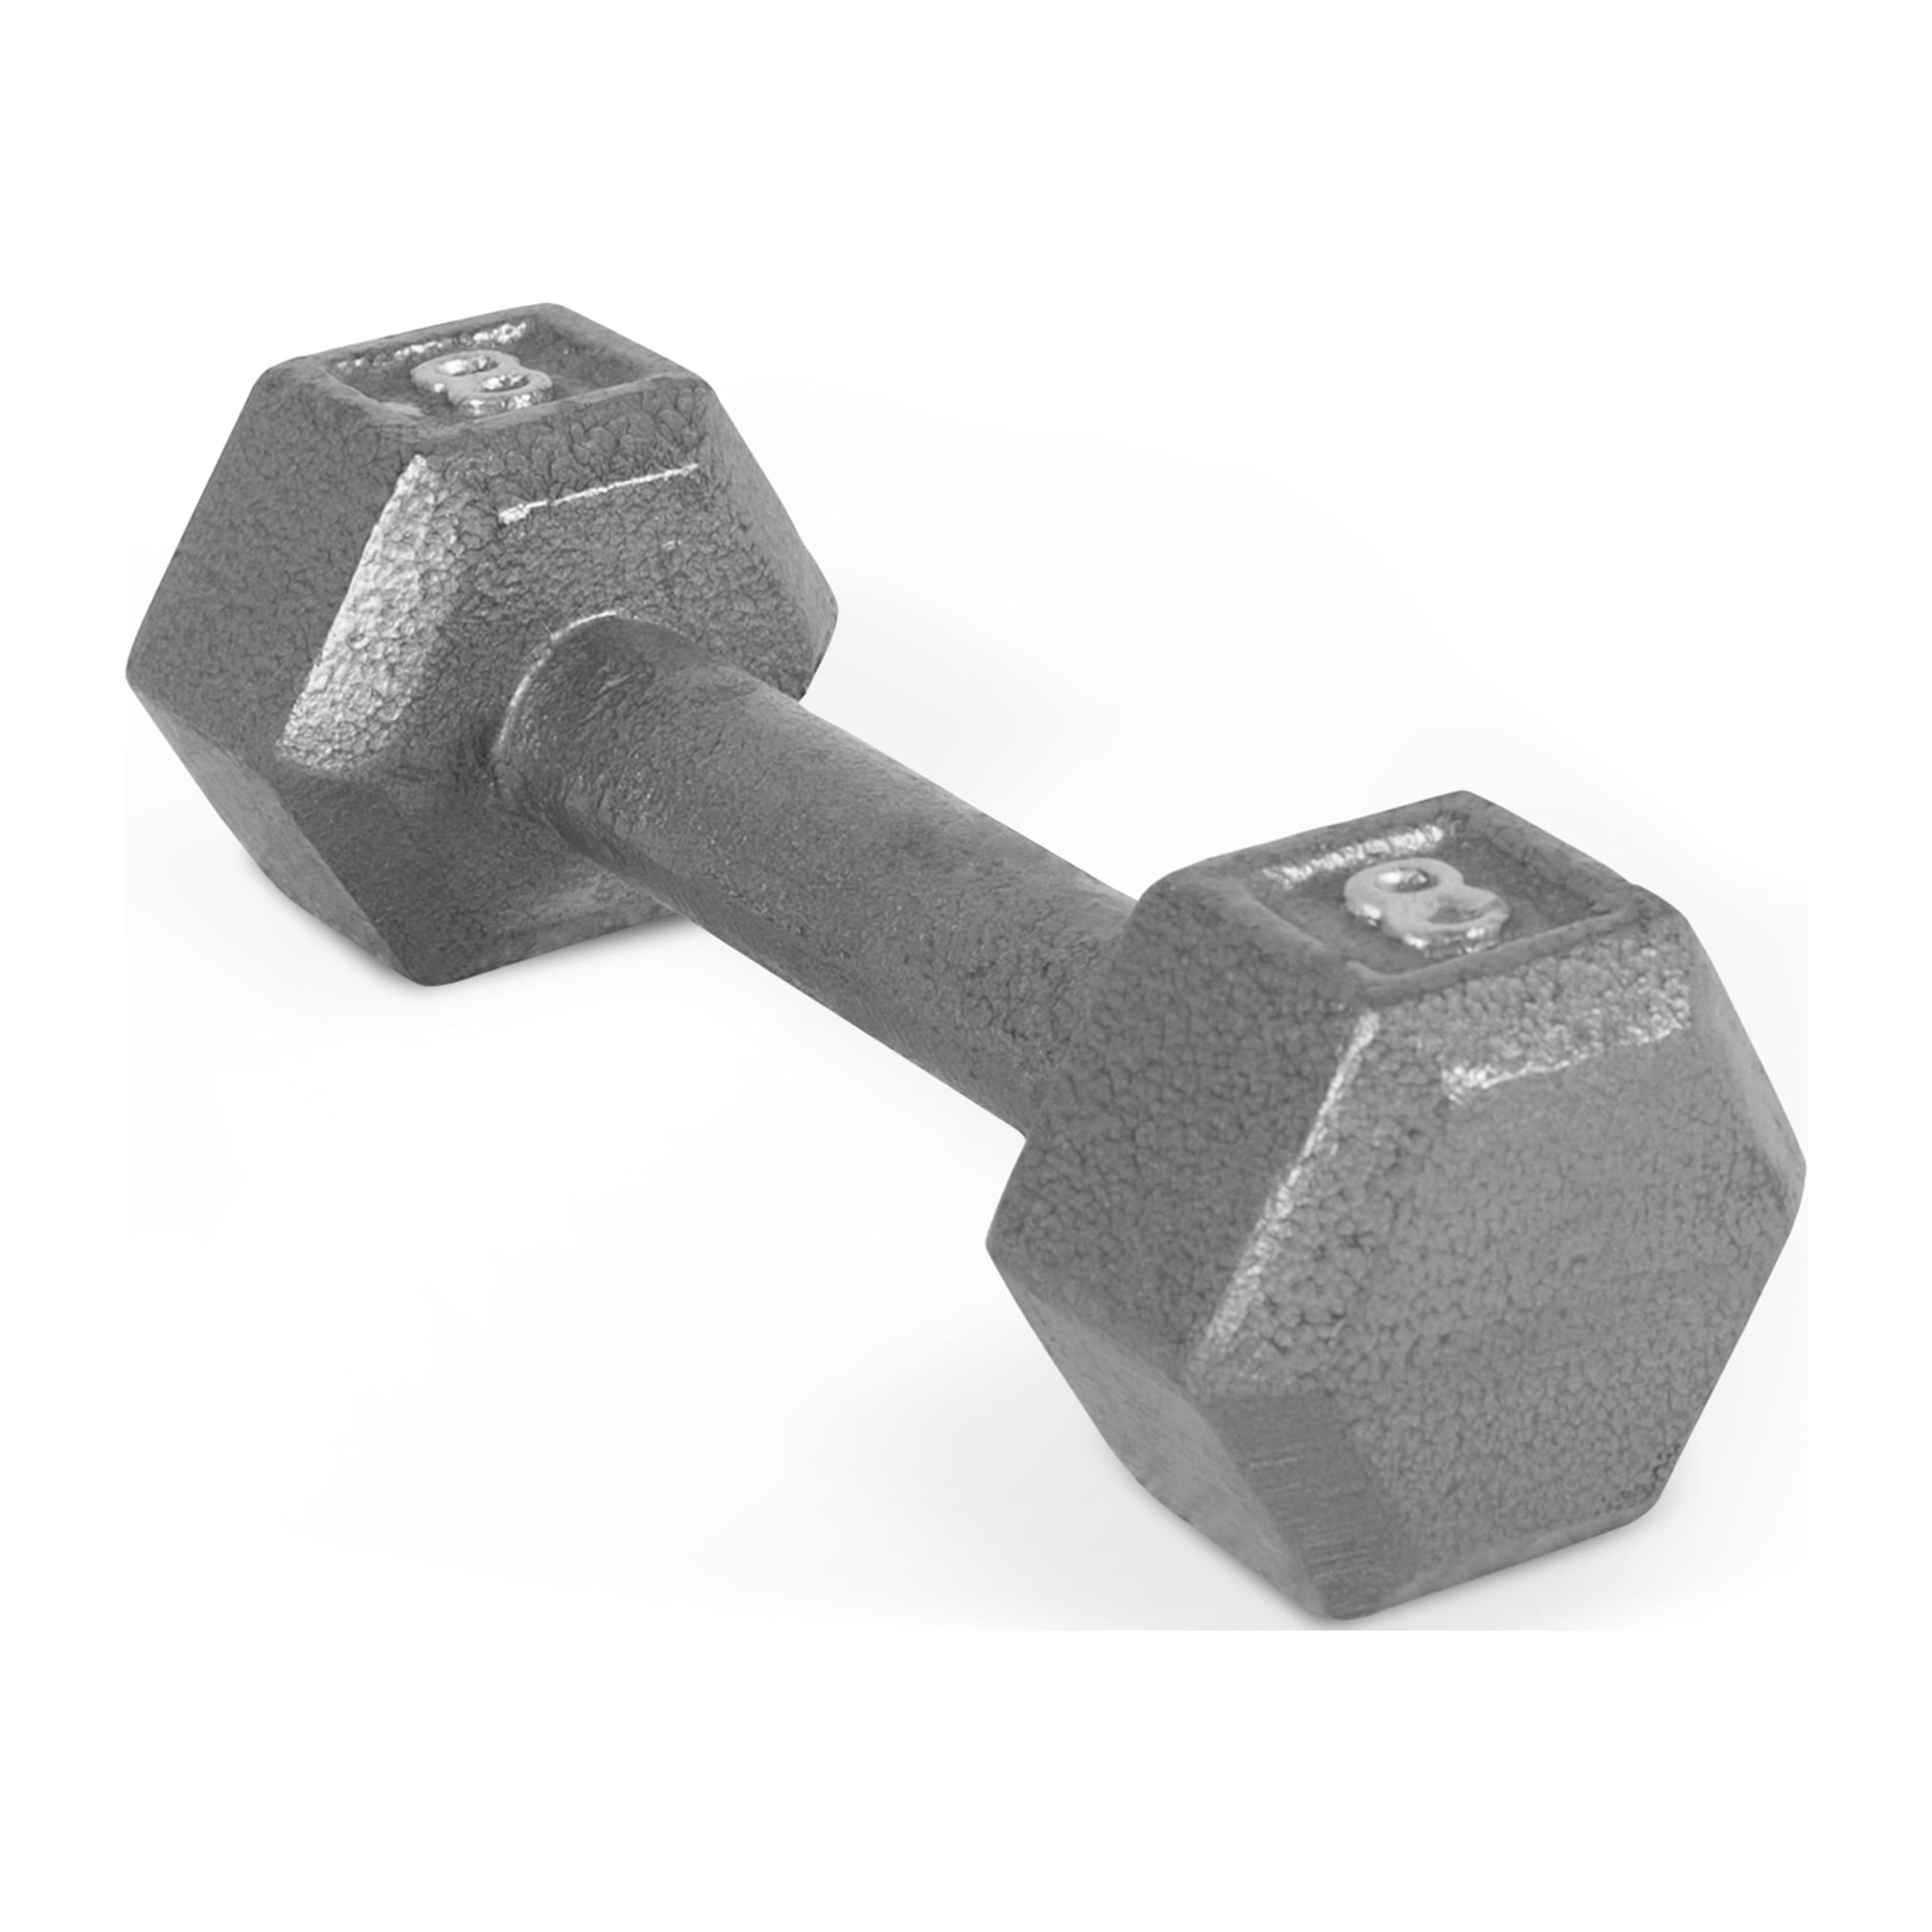 CAP Barbell 8lb Cast Iron Hex Dumbbell, Single - image 1 of 6